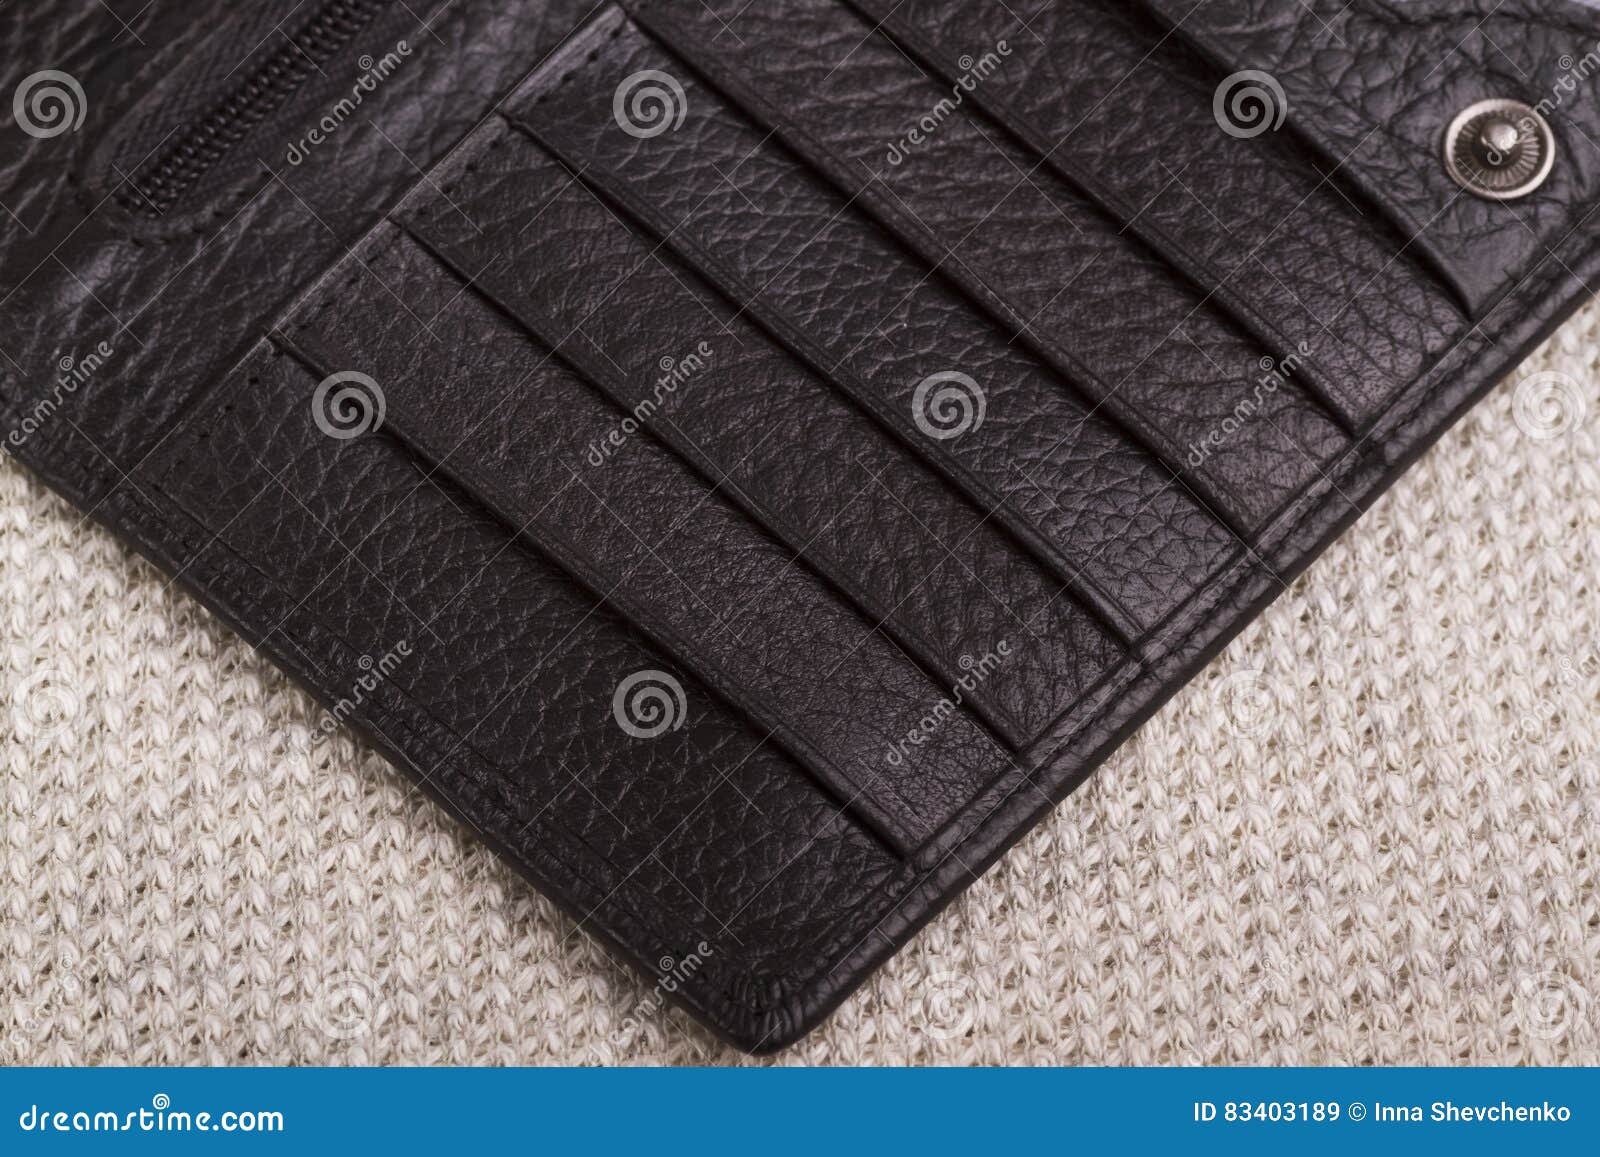 Of the Purse Close-up, Skin Texture, Stock Image - Image of personal ...